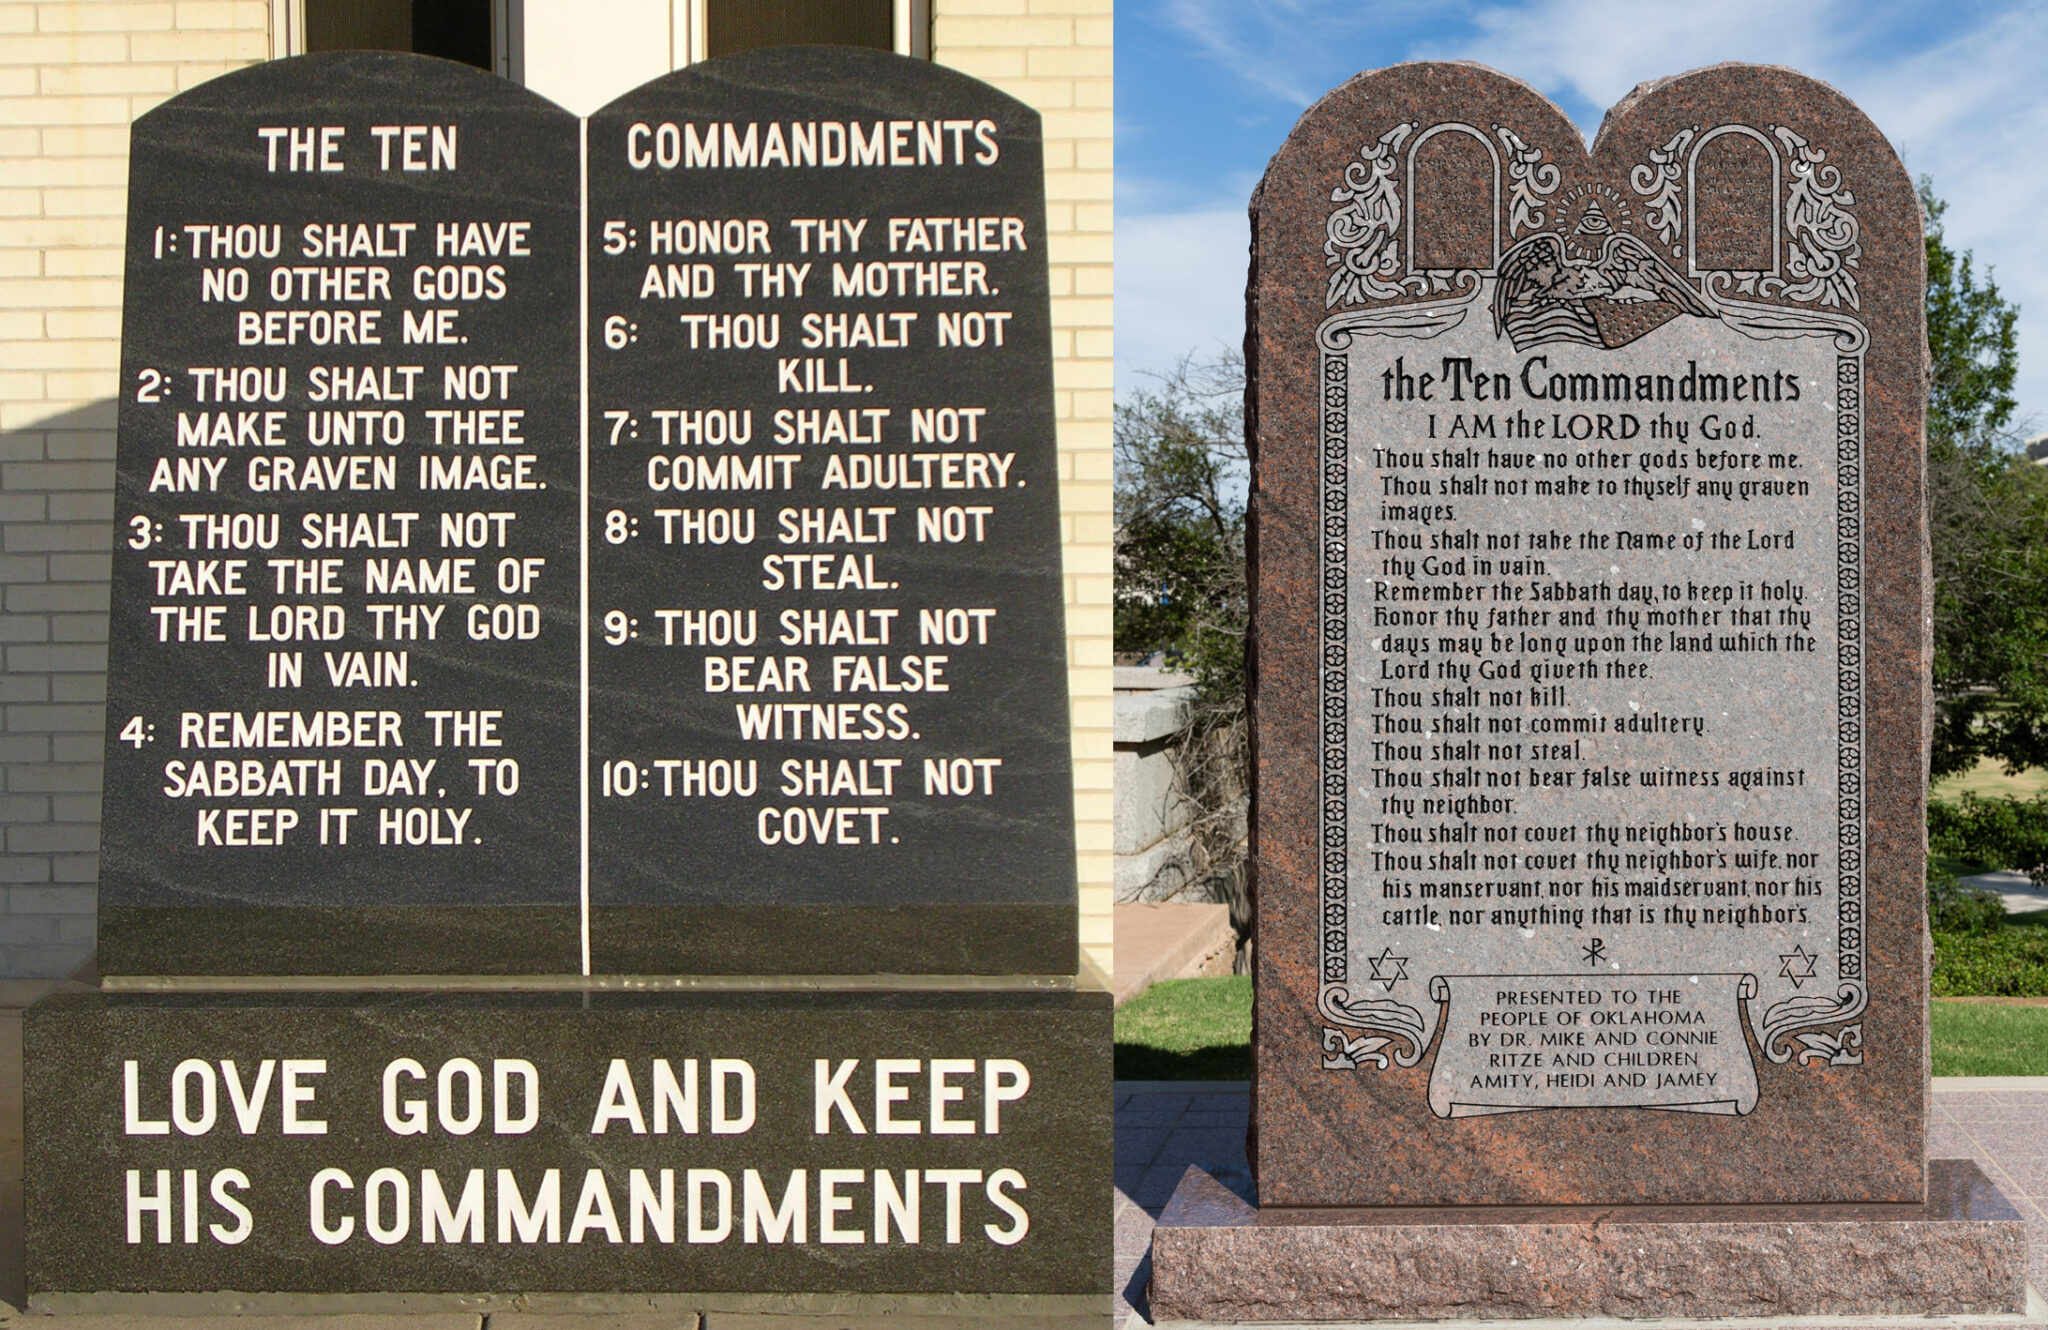 why are there 2 different lists of ten commandments